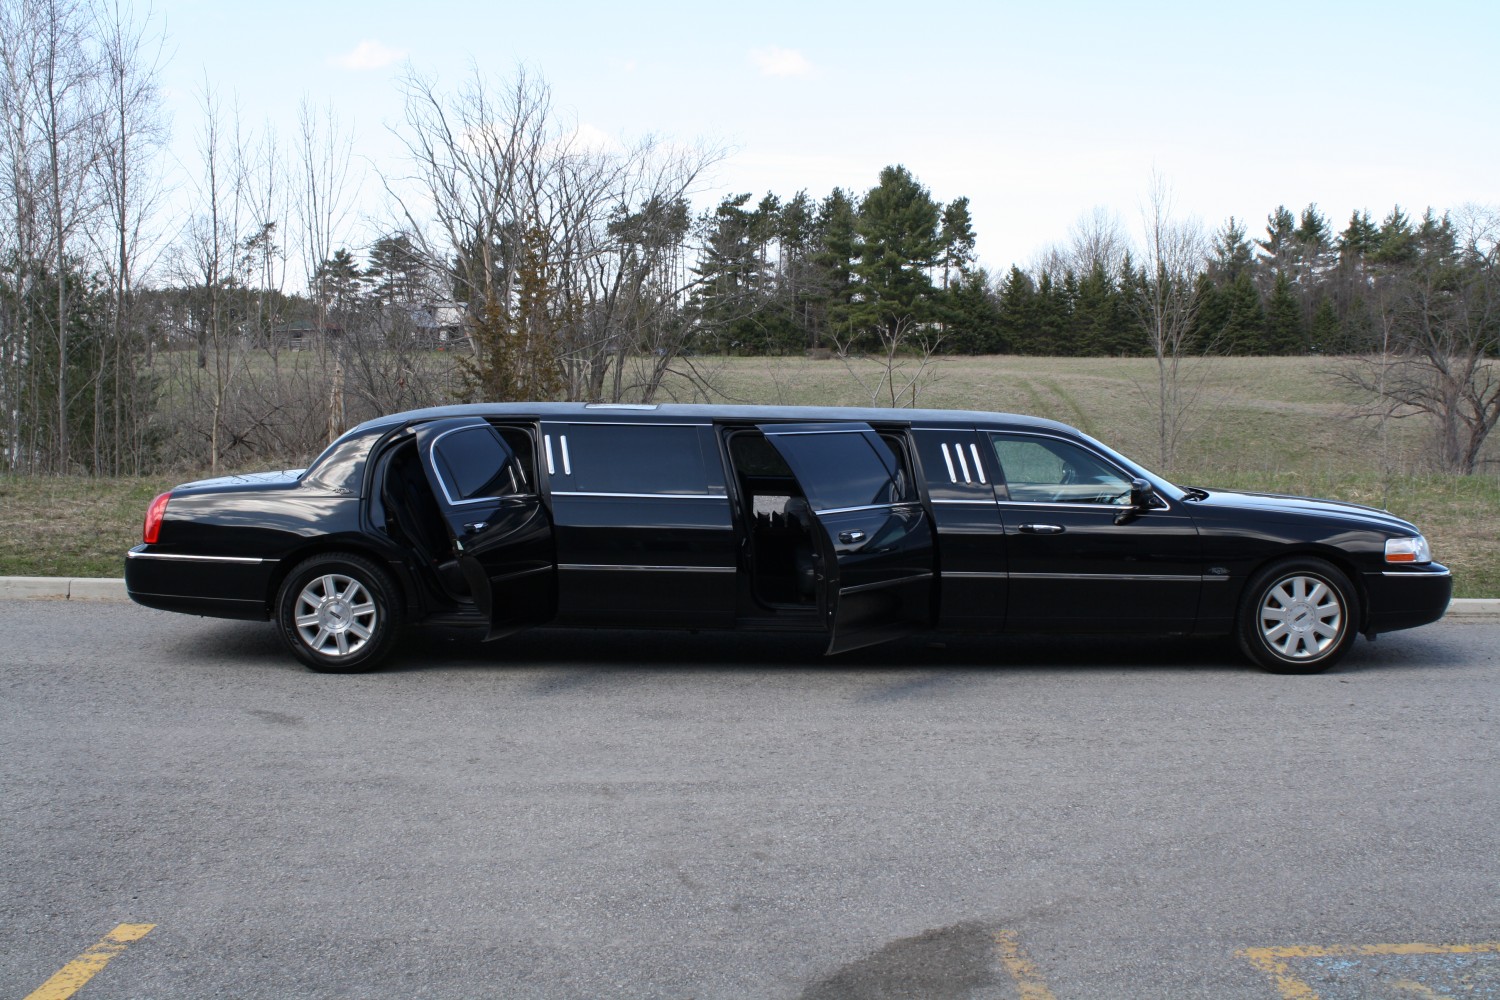 Black Strech Limousine 5 Doors in San Diego for prom, quinceanera, wedding, dinner, airport transfers and more